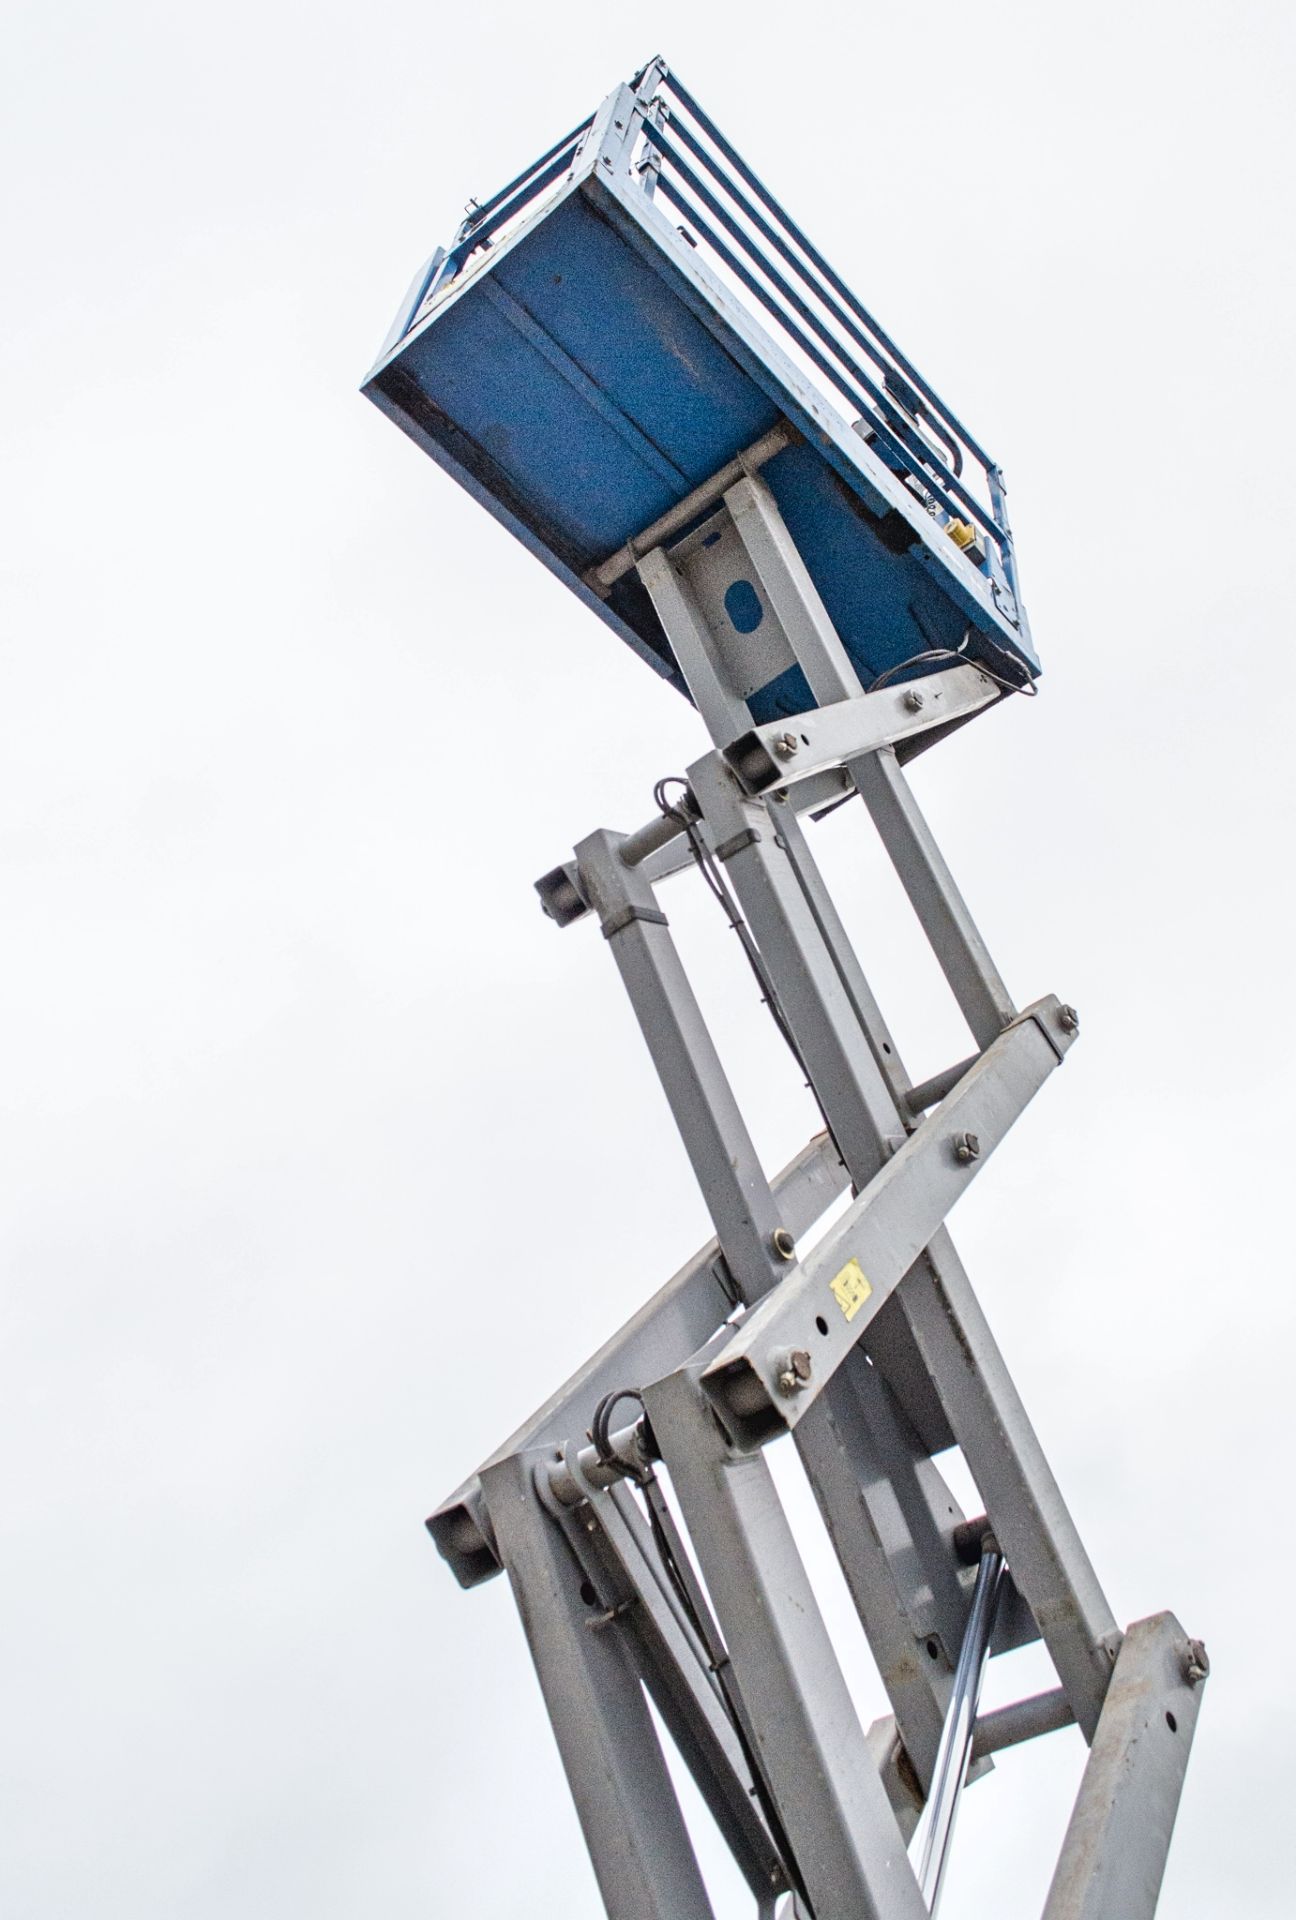 Genie GS1932 battery electric scissor lift Year: 2005 S/N: 18897 Recorded Hours: 191 A679484 - Image 5 of 8